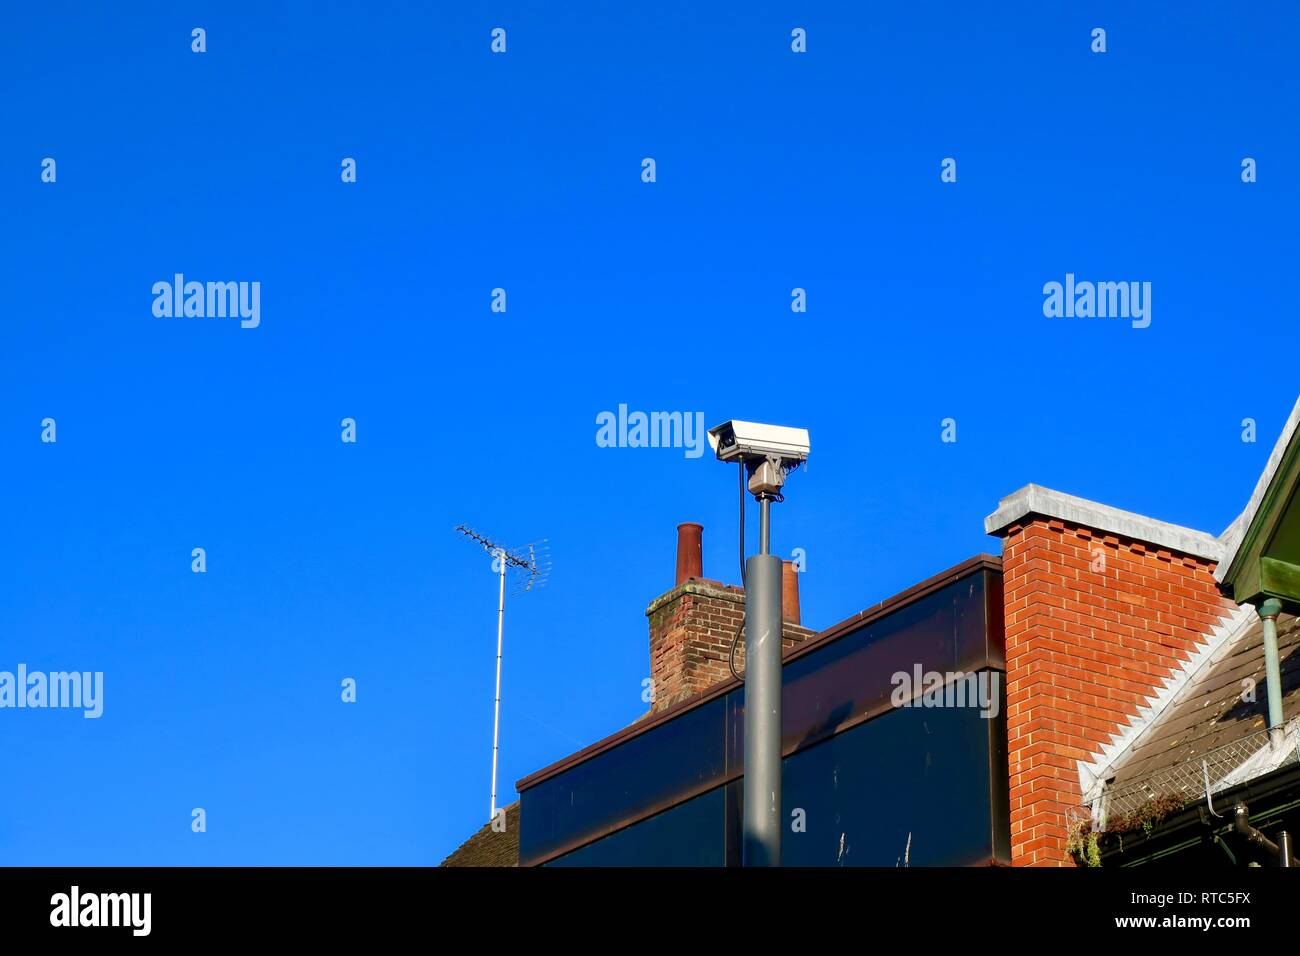 Big Brother is watching you. CCTV camera high above the rooftops in Ipswich, Suffolk, UK. February 2019. Stock Photo